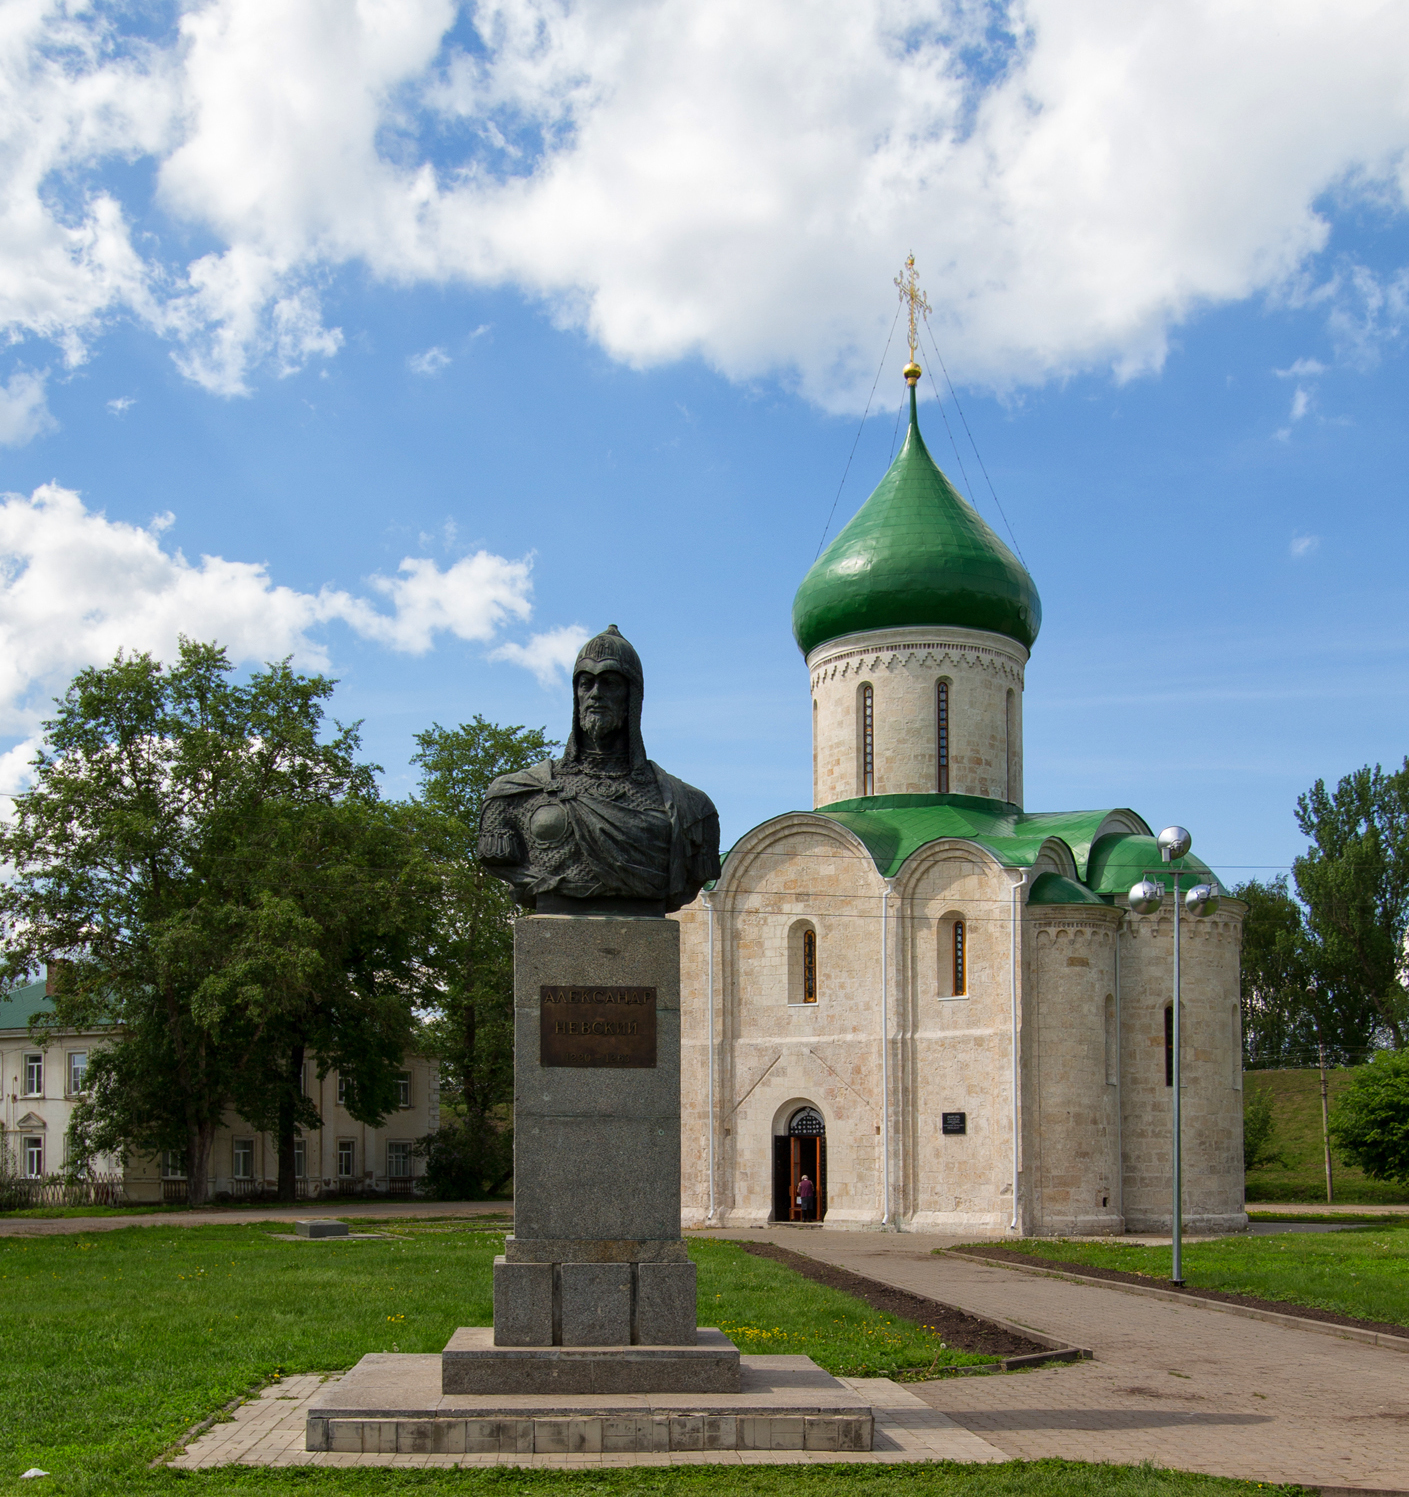 The pearl of Pereslavl-Zalessky is the Transfiguration Cathedral 